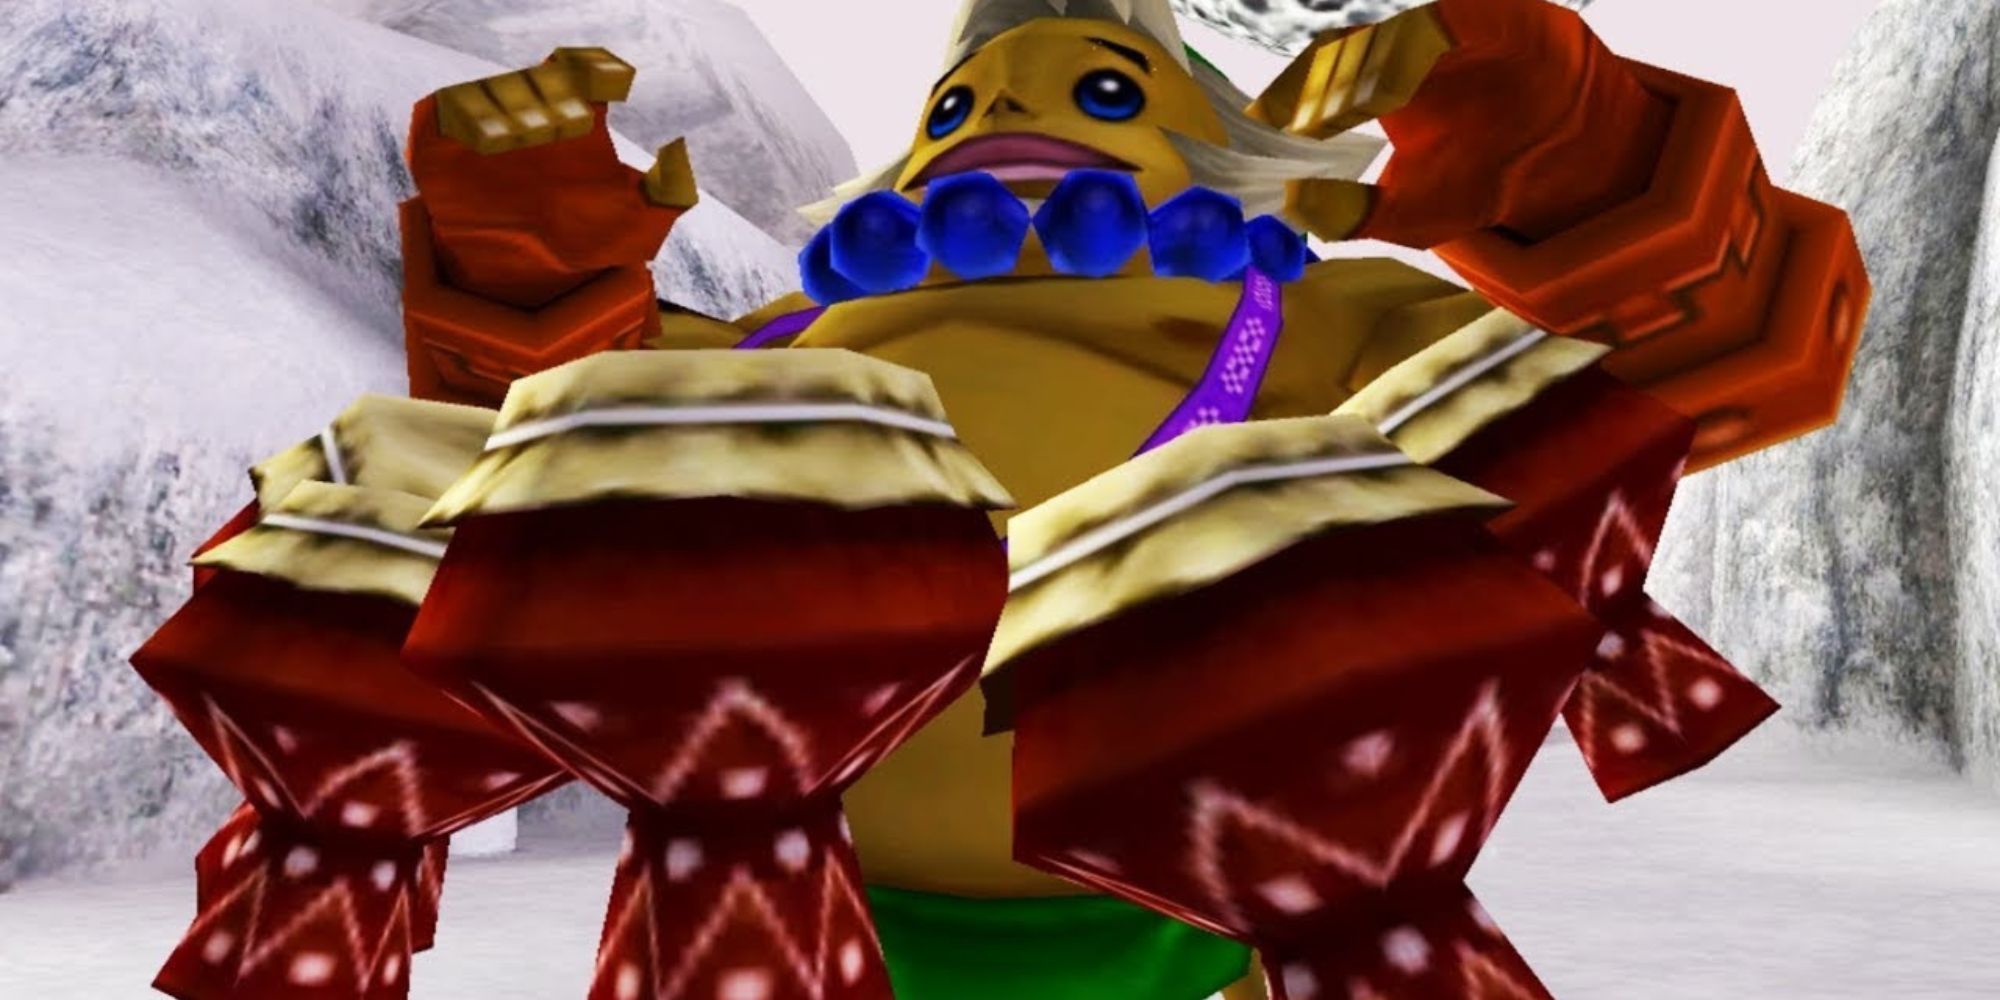 Goron Link plays the Drums in the snowy mountains